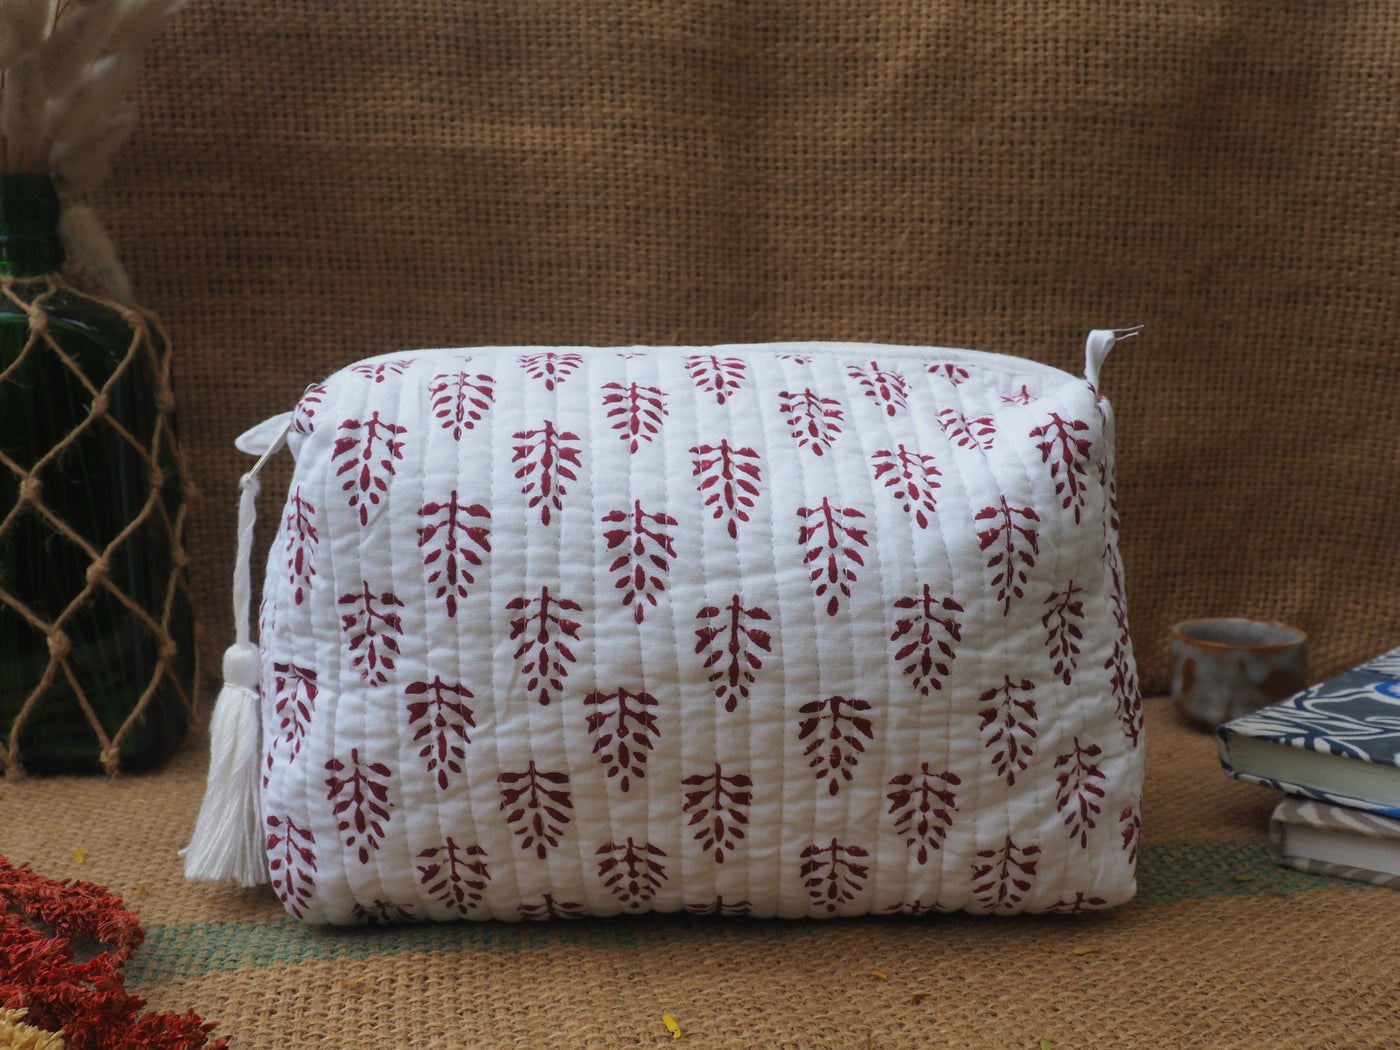 Indi Pouch Medium - White & Red leaves IPM02